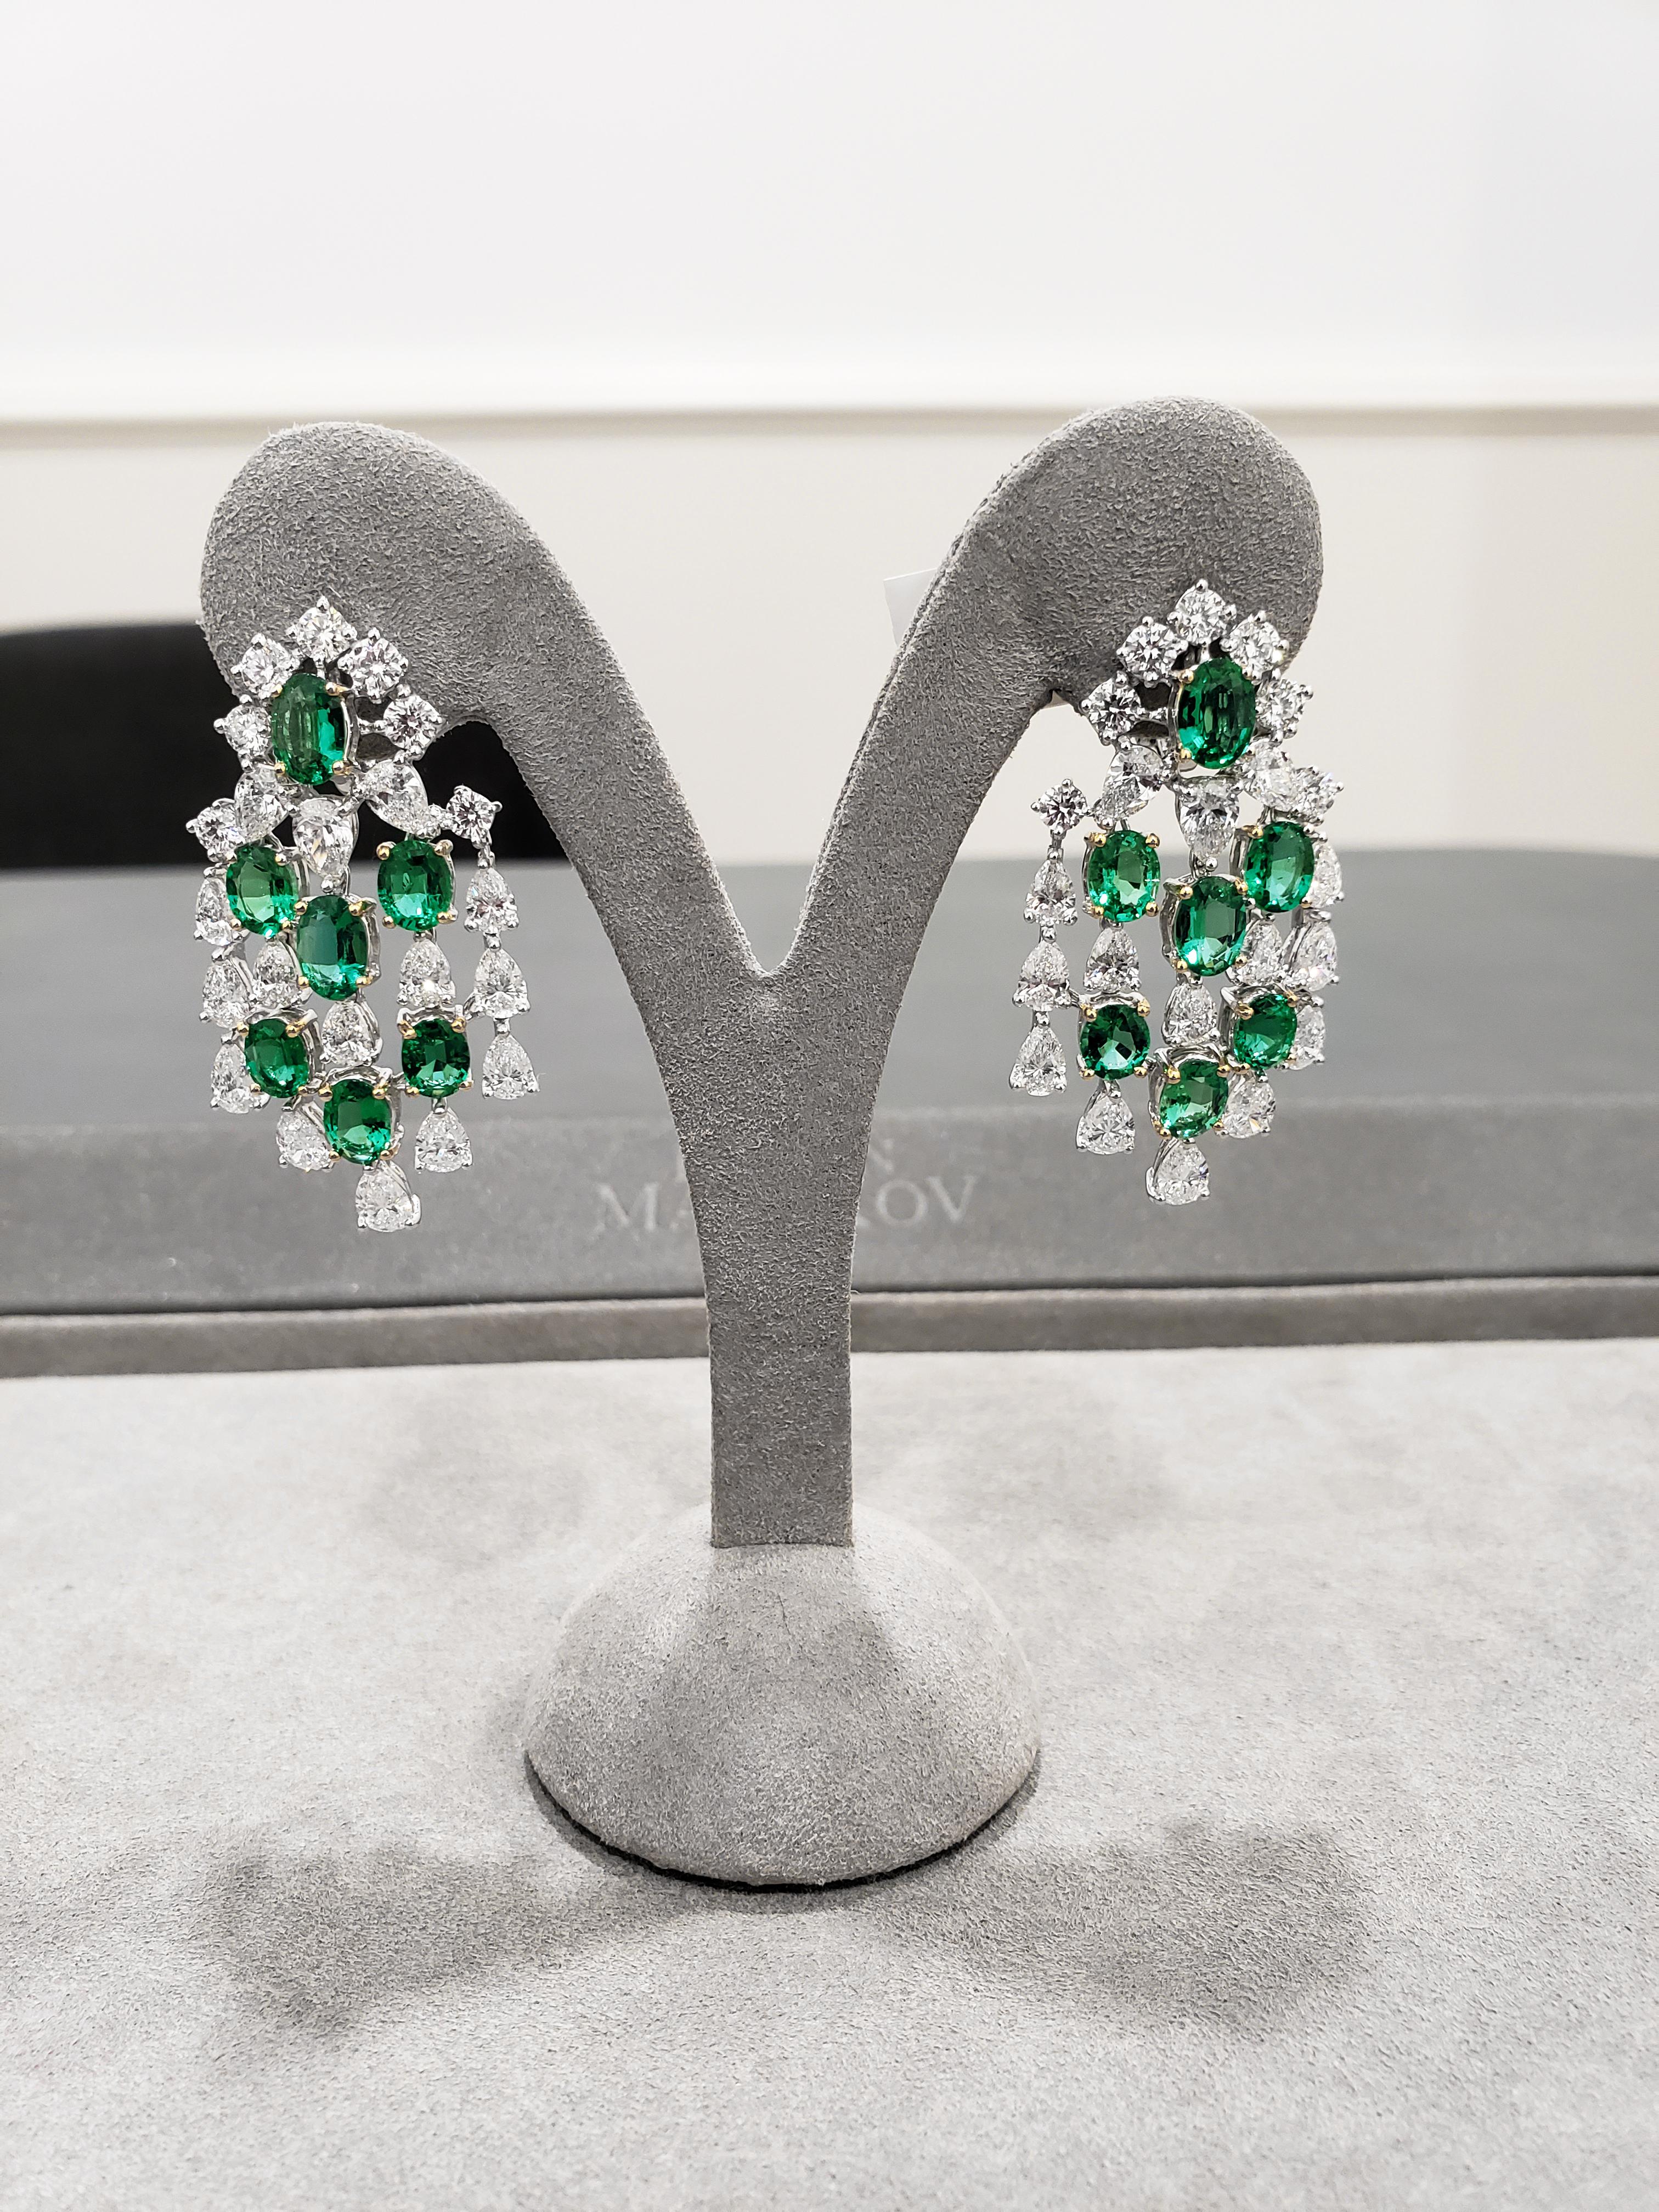 A stunning pair of earrings showcasing 14 vibrant oval cut green emeralds weighing 7.49 carats total; accented by 9.90 carats total of dazzling round and pear shaped diamonds. Intricately designed and expertly handcrafted to perfection. A truly